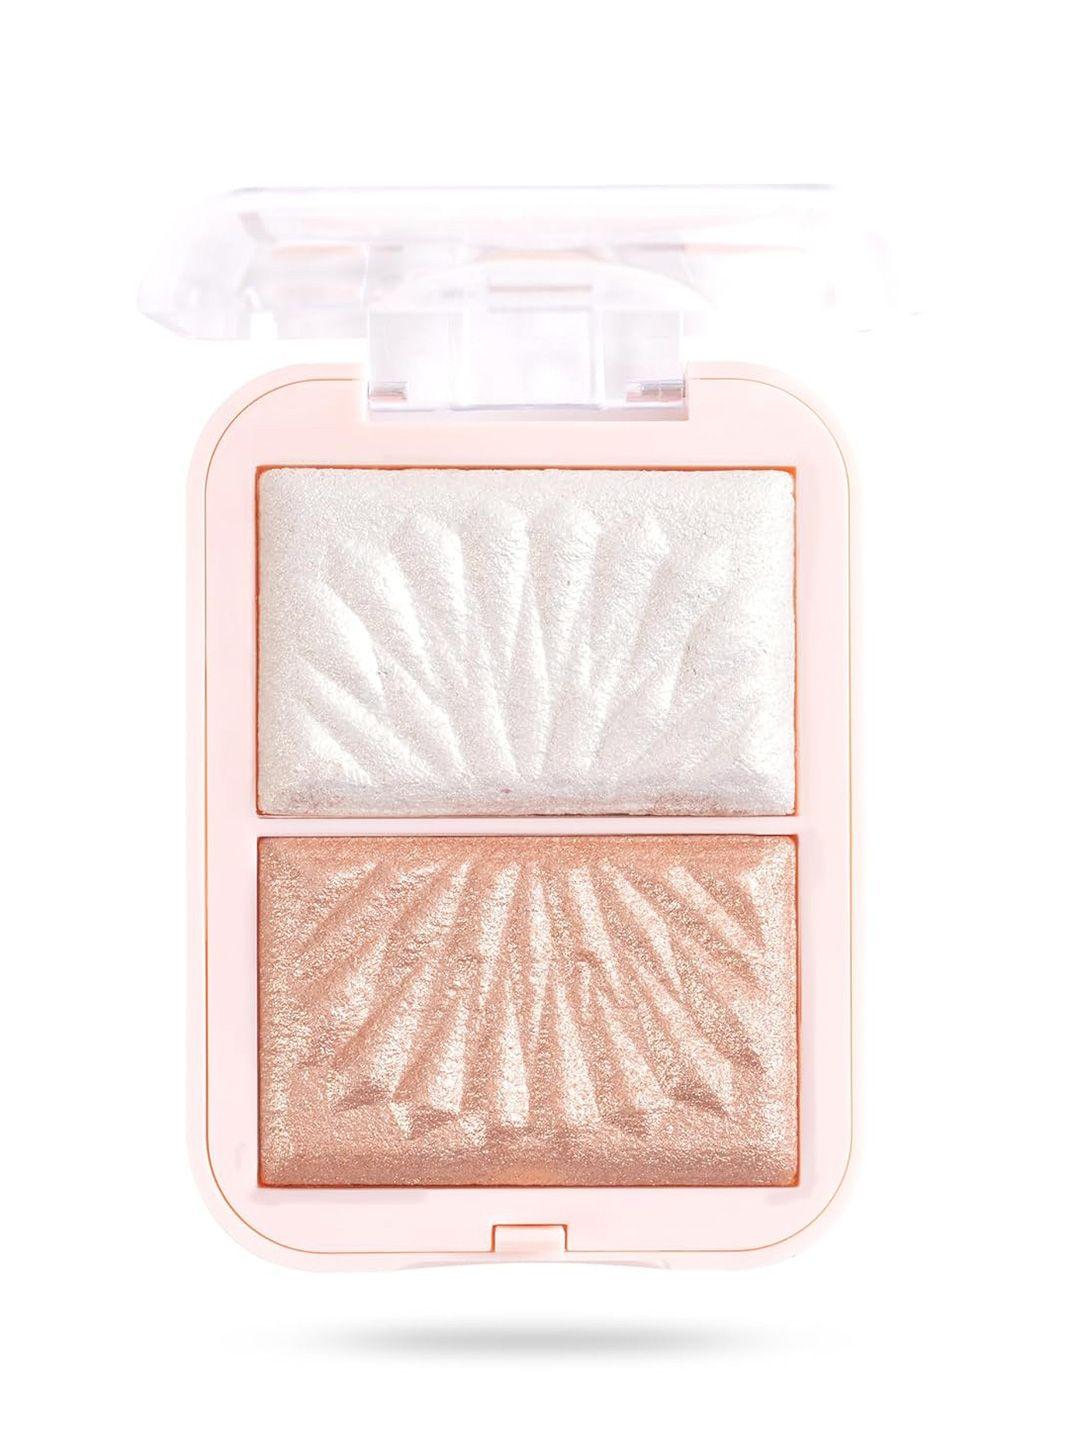 shryoan soft touch backed highlighter & blush - 01